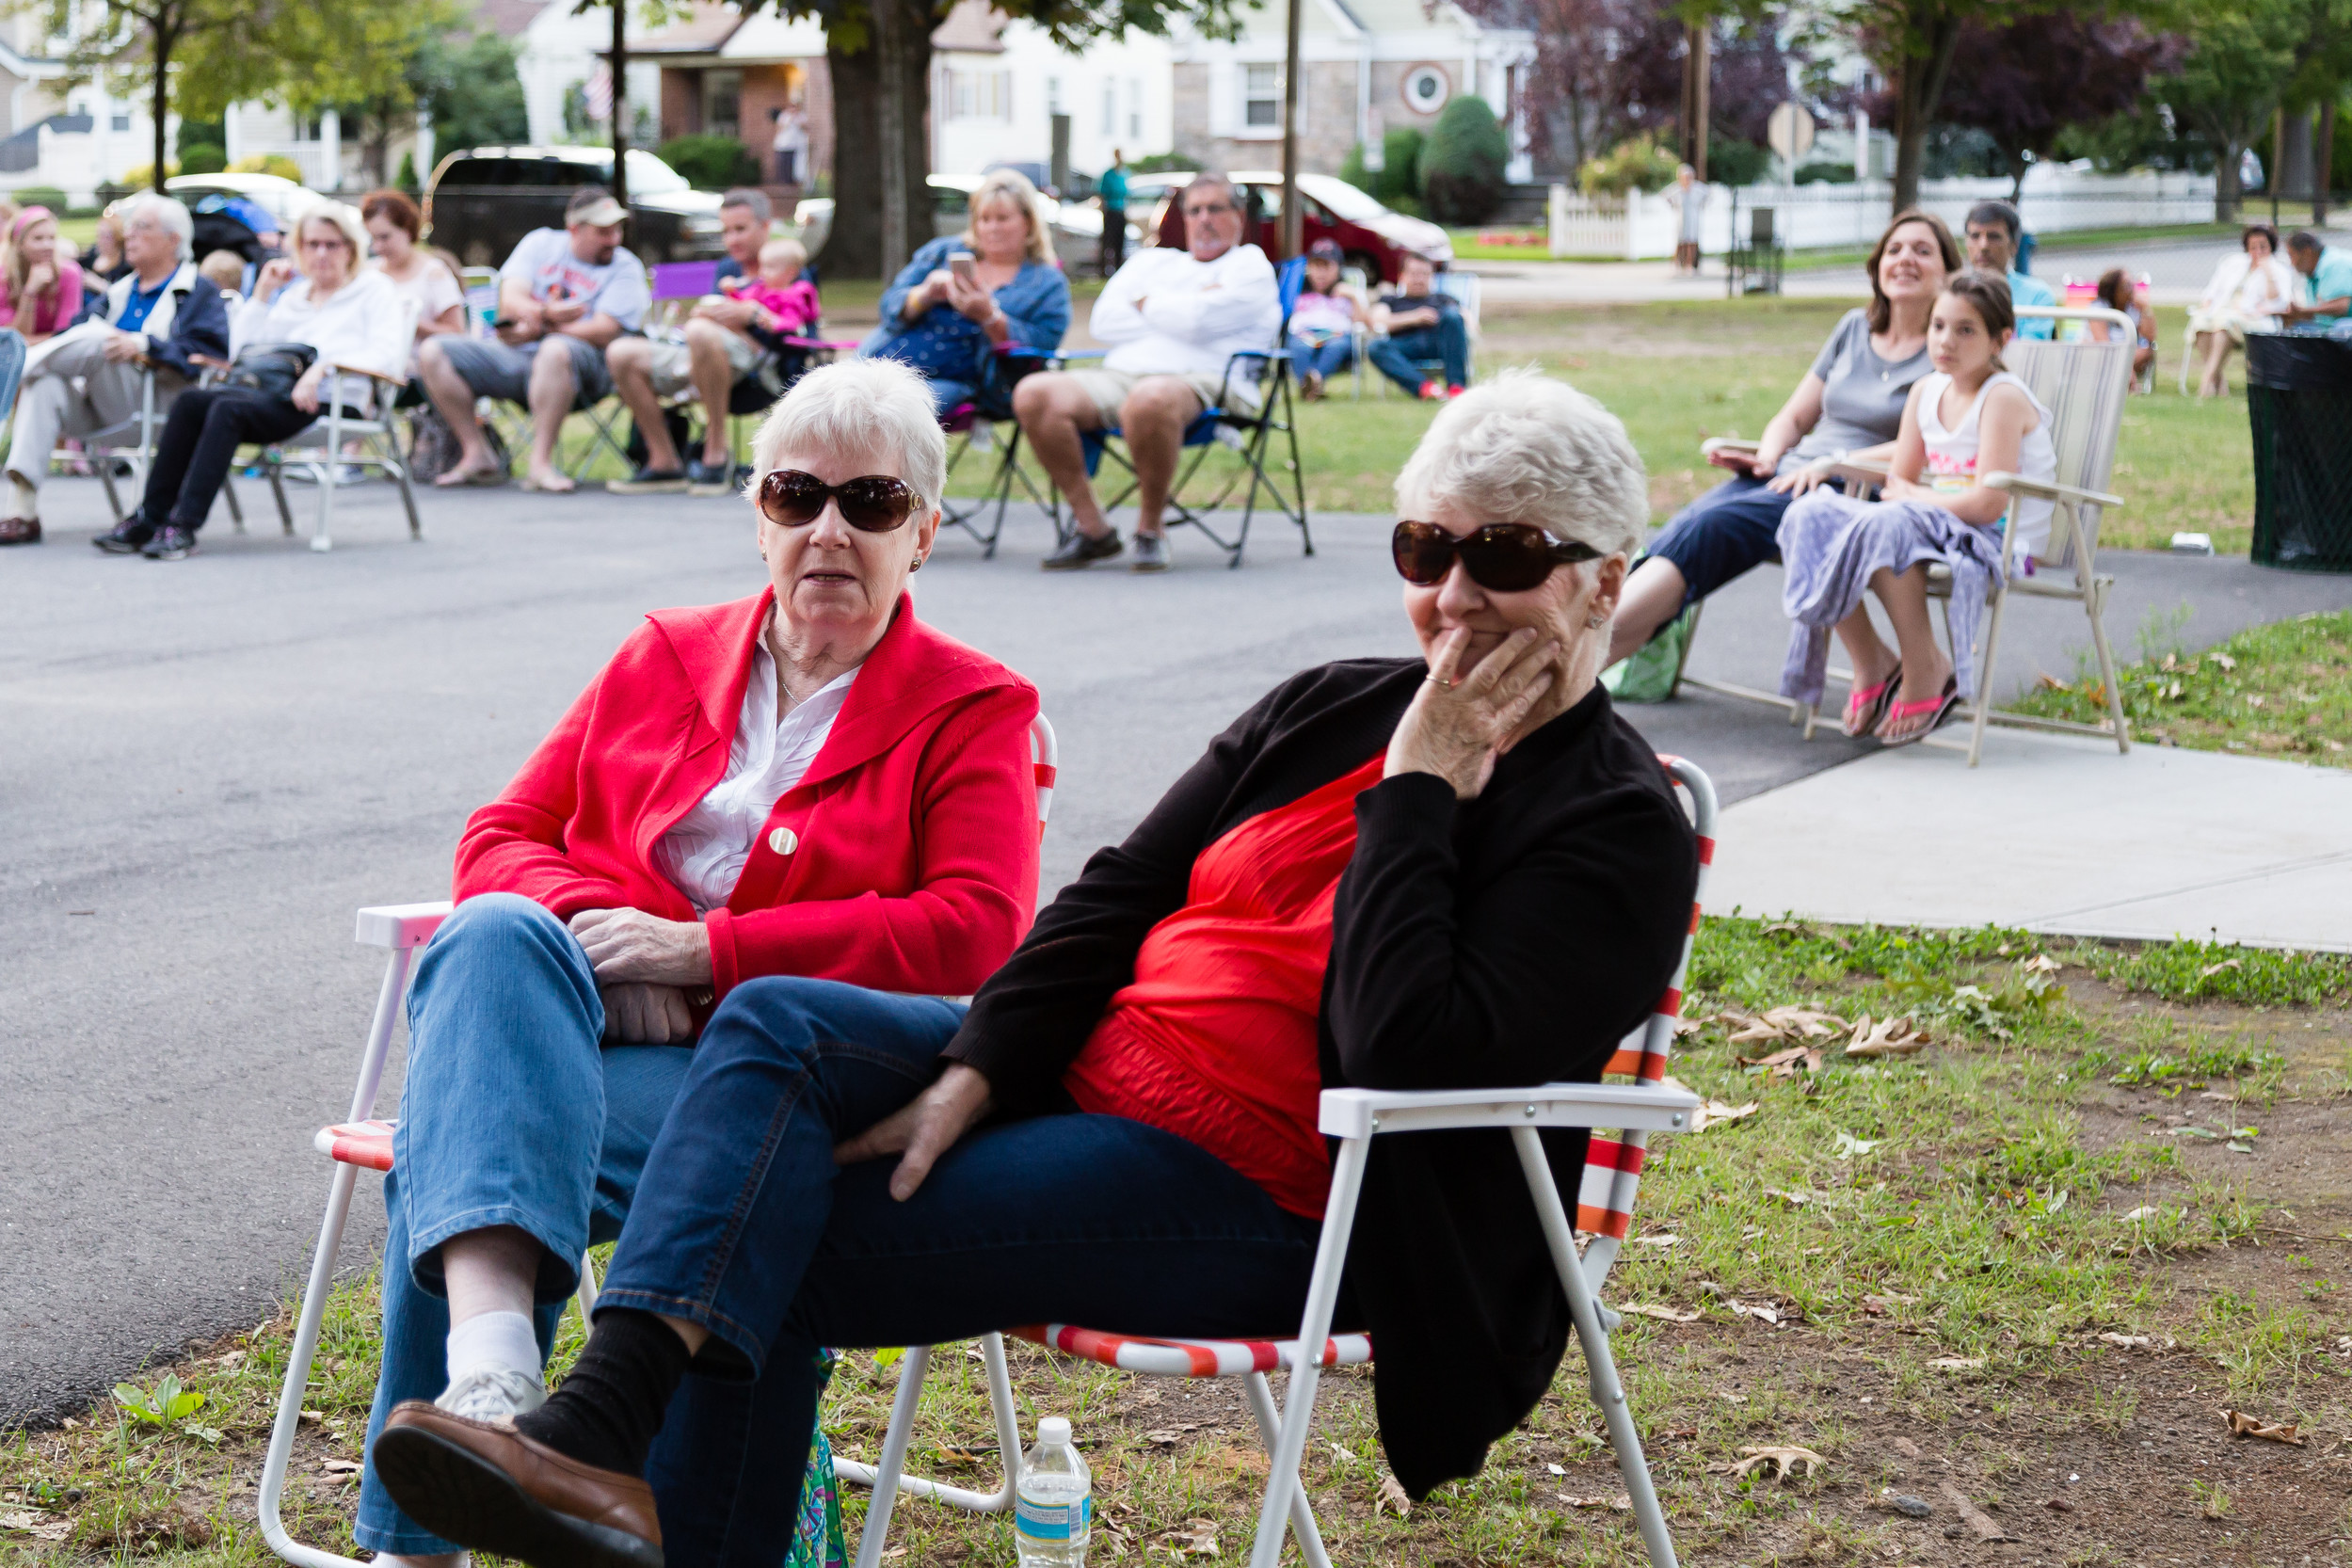 L to R: Eileen Goode and Millie Pavia enjoy
The Steel Silk Band performance at East Rockaway Summer Concert Series at Memorial Park in East Rockaway, New York on Saturday July 2nd 2016.